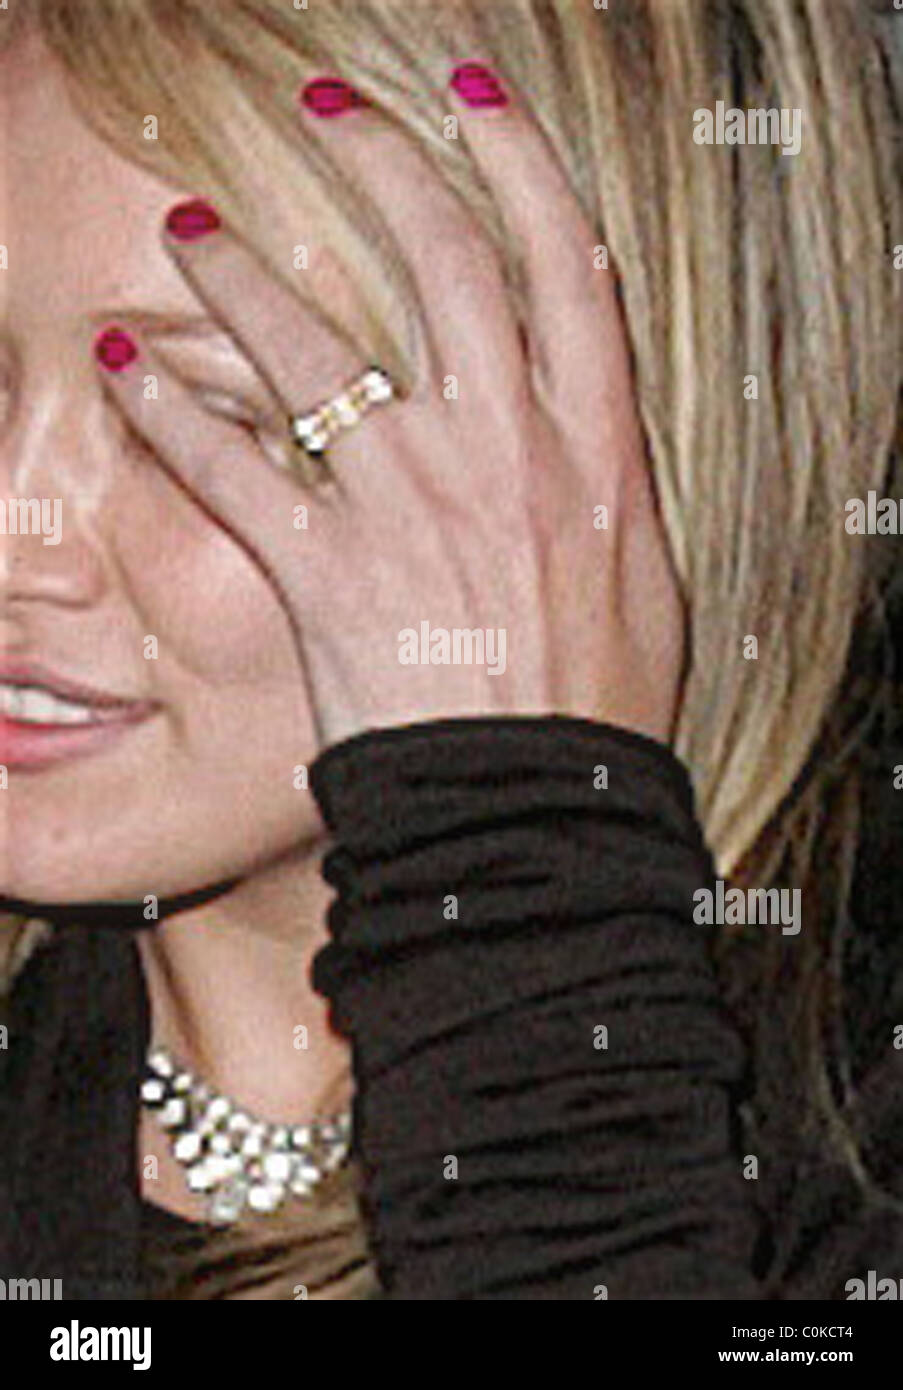 Hilary Duff's Engagement Ring Revealed: Photo 2429242 | Hilary Duff, Mike  Comrie Photos | Just Jared: Entertainment News